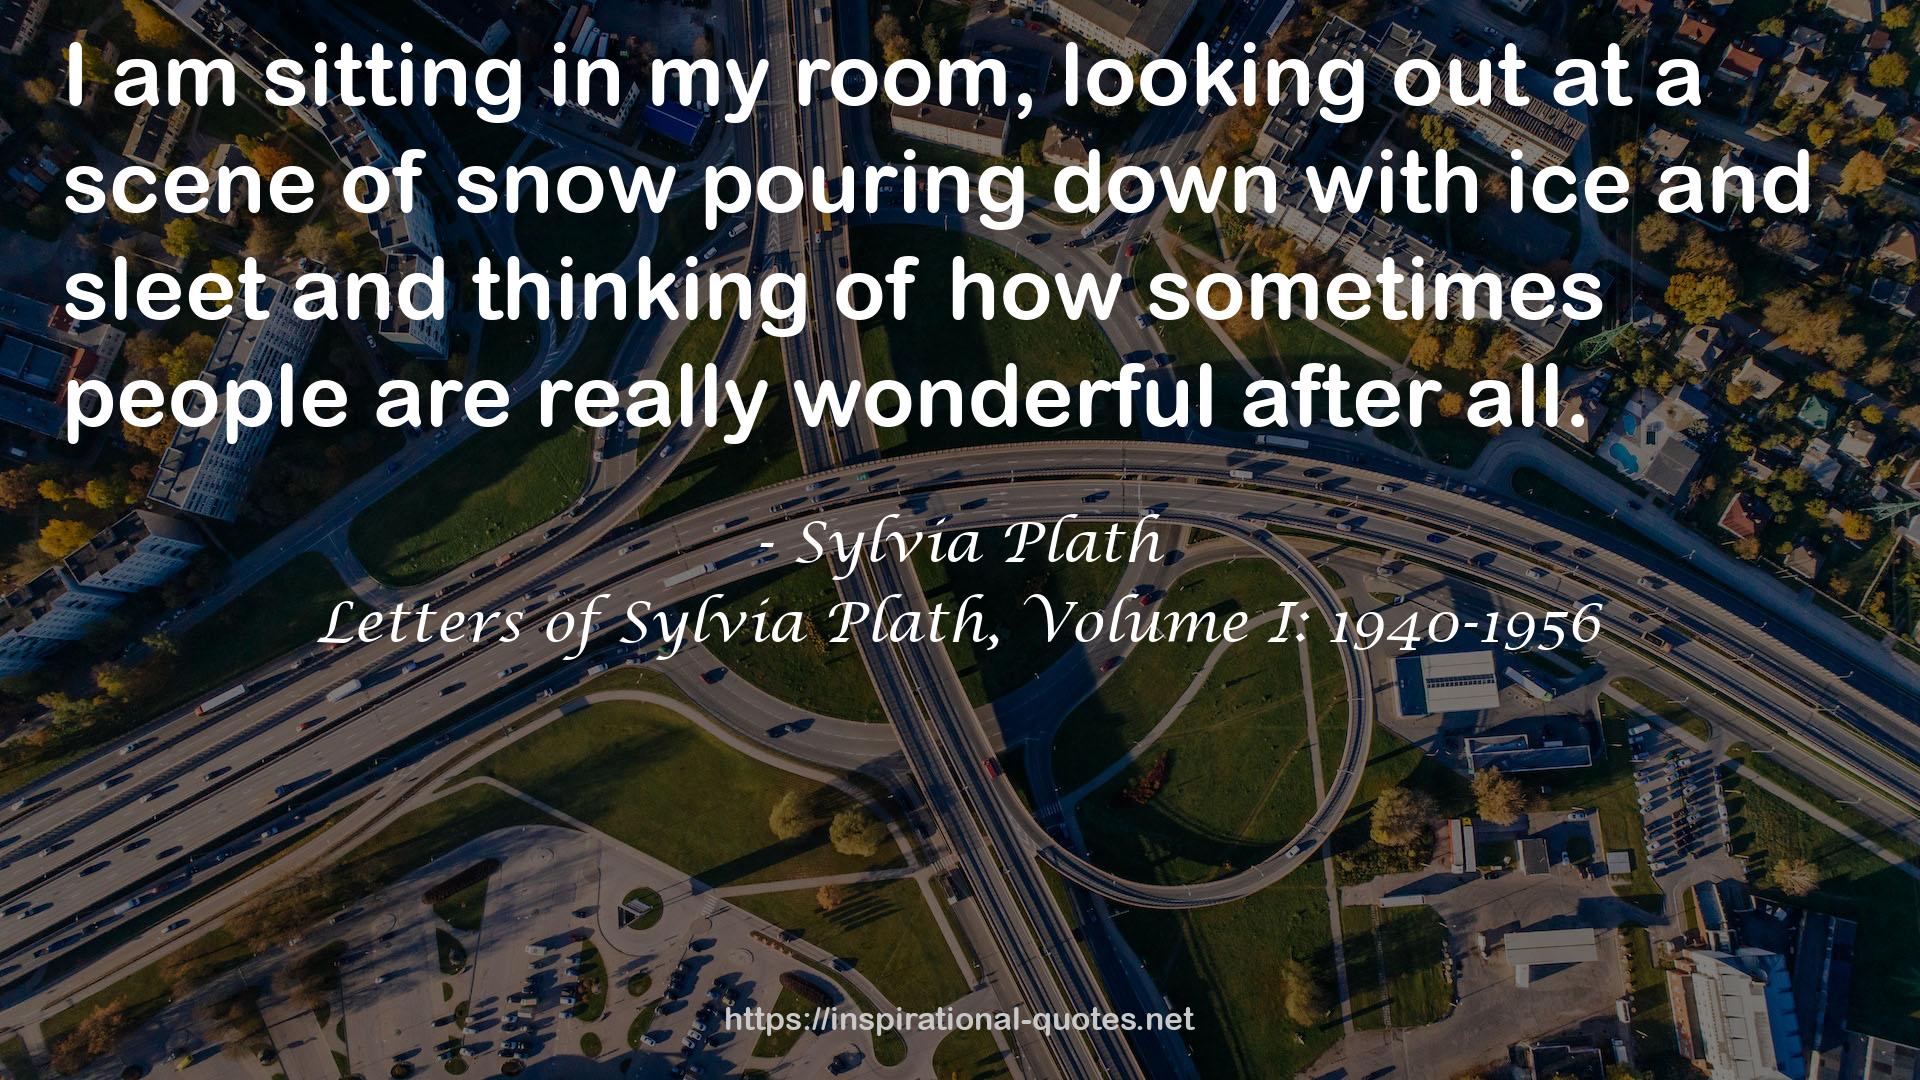 Letters of Sylvia Plath, Volume I: 1940-1956 QUOTES